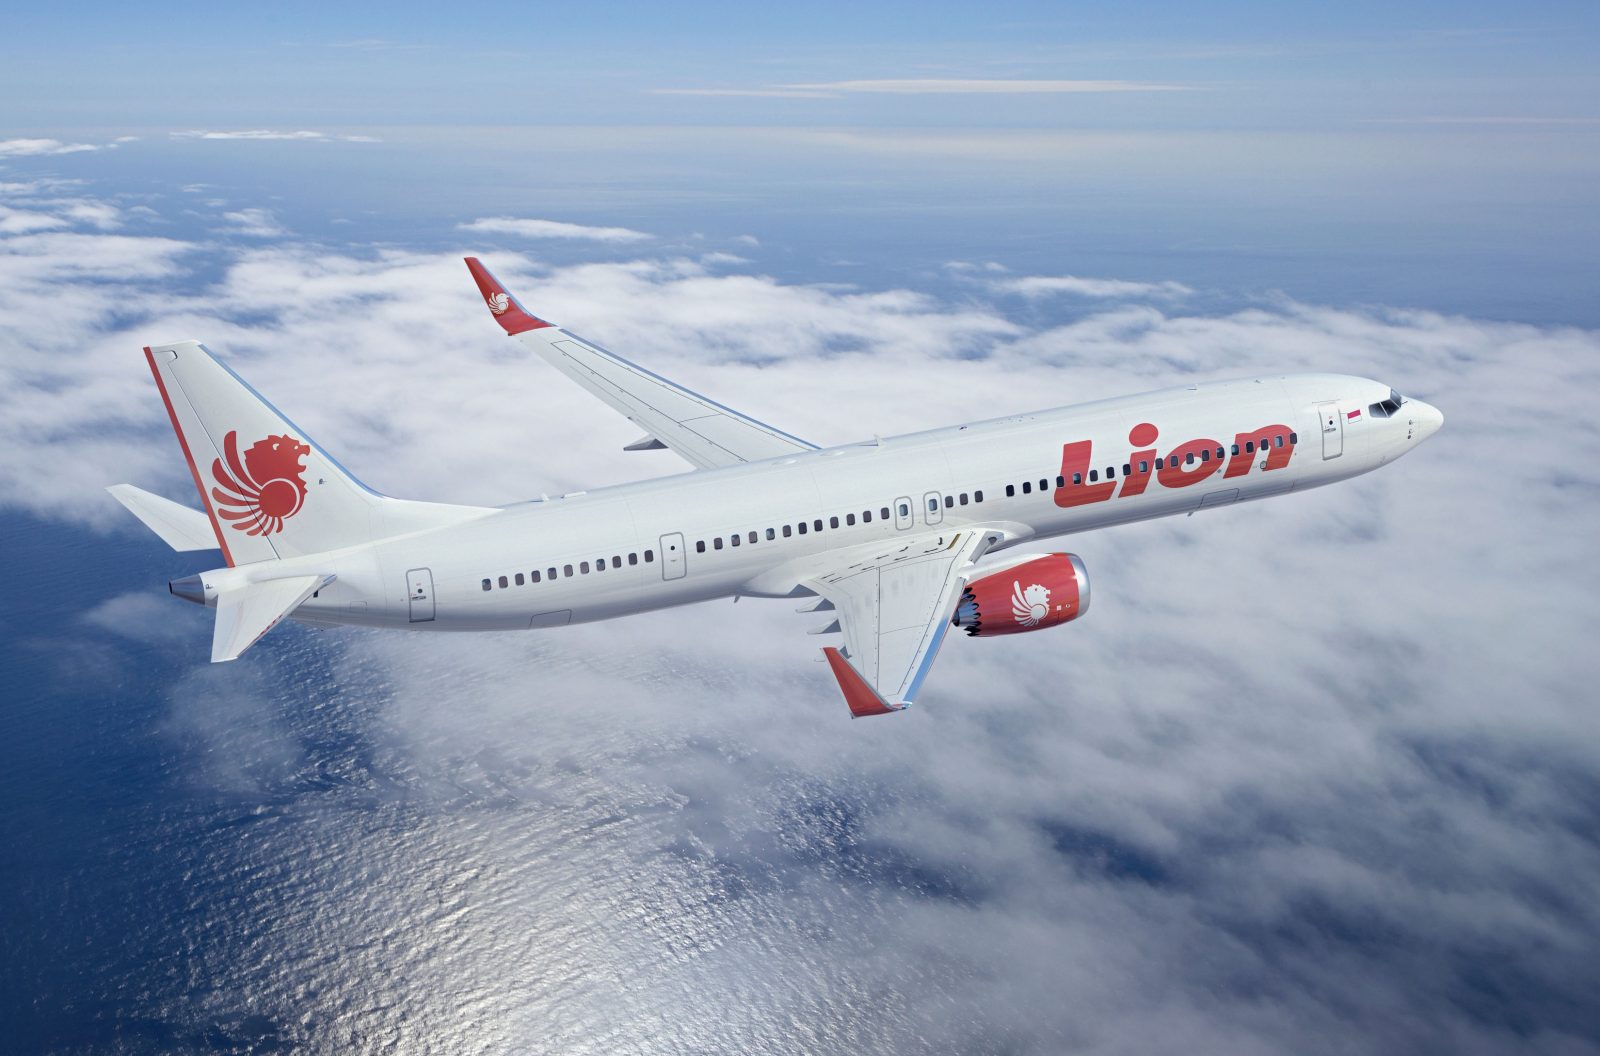 New Lawsuit Alleges Lion Air Crash Was Direct Results of Boeing's "Gross Negligence"